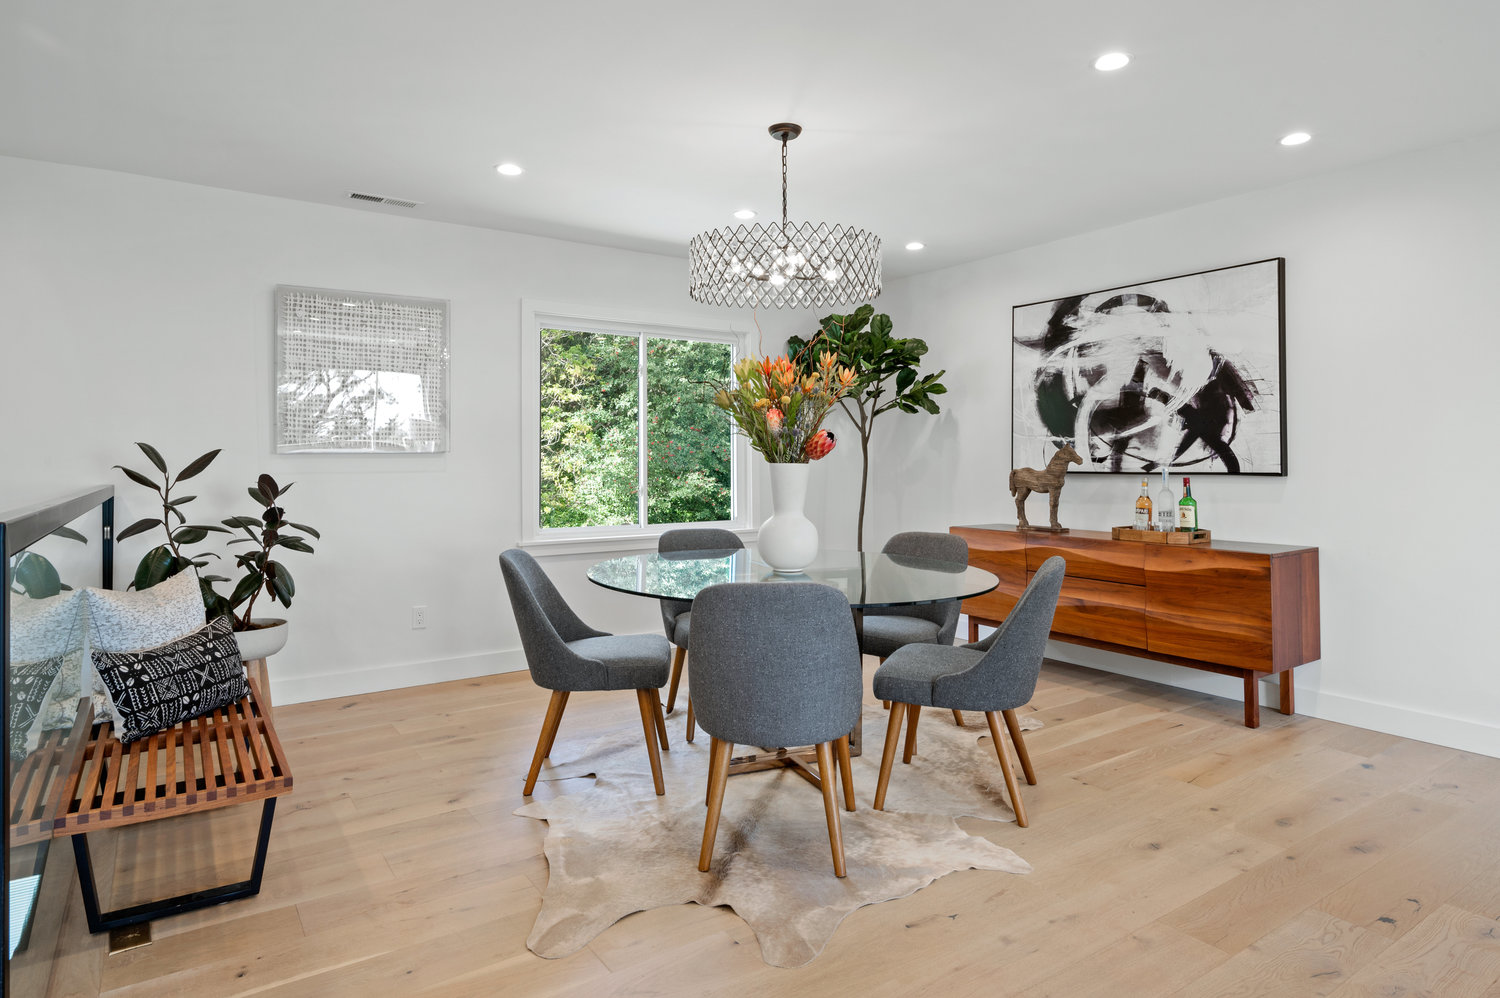 Property Photo: View of the dining area, featuring a mid-century modern light fixture and wood floors